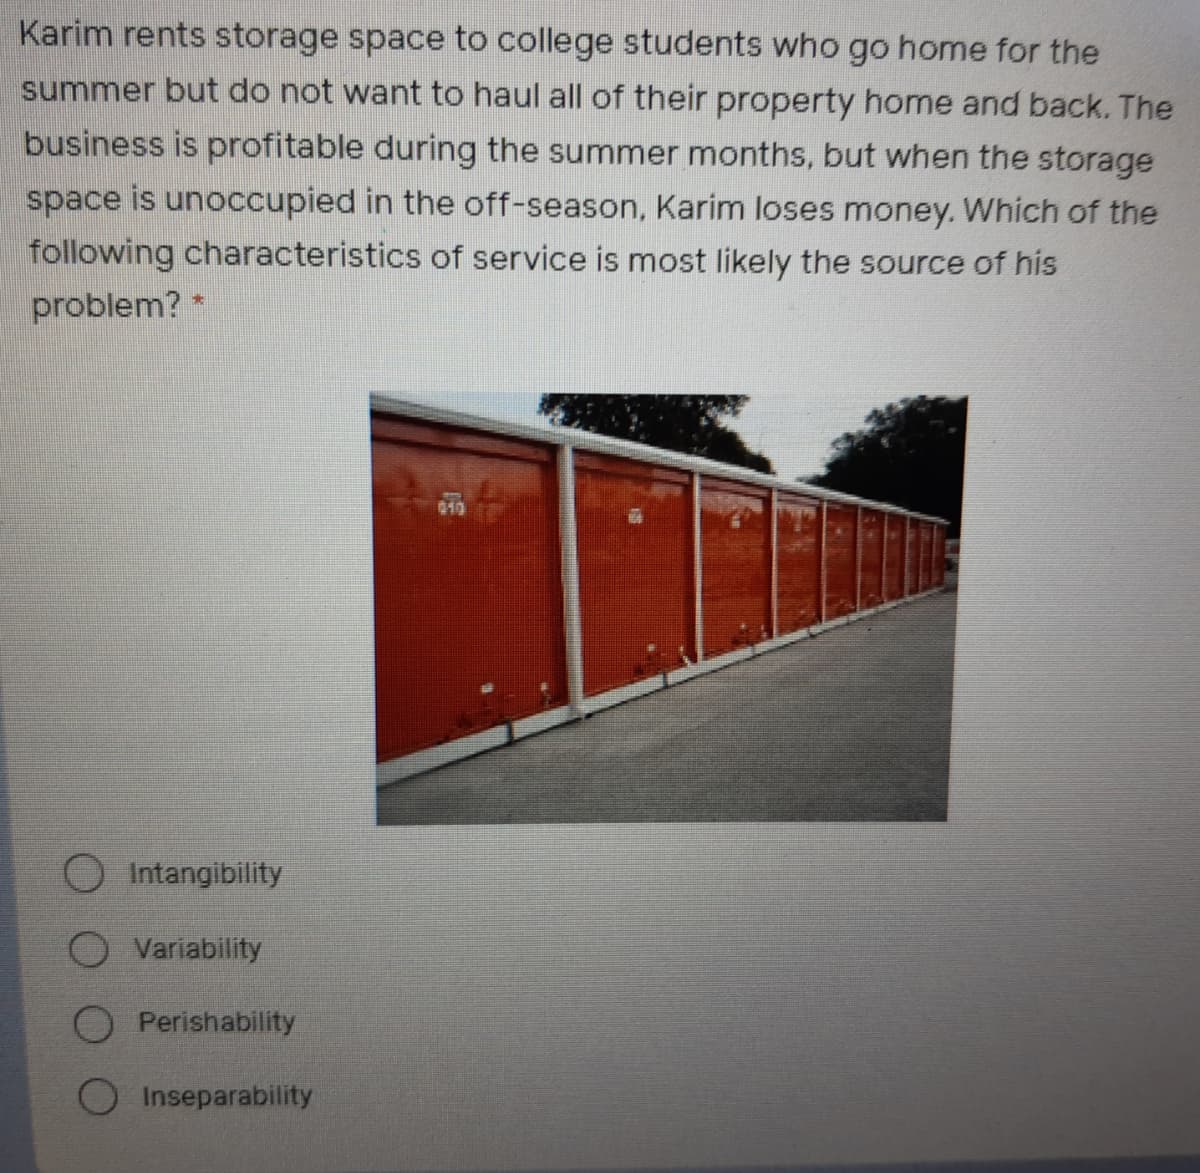 Karim rents storage space to college students who go home for the
summer but do not want to haul all of their property home and back. The
business is profitable during the summer months, but when the storage
space is unoccupied in the off-season, Karim loses money. Which of the
following characteristics of service is most likely the source of his
problem? *
019
O Intangibility
O Variability
Perishability
Inseparability
